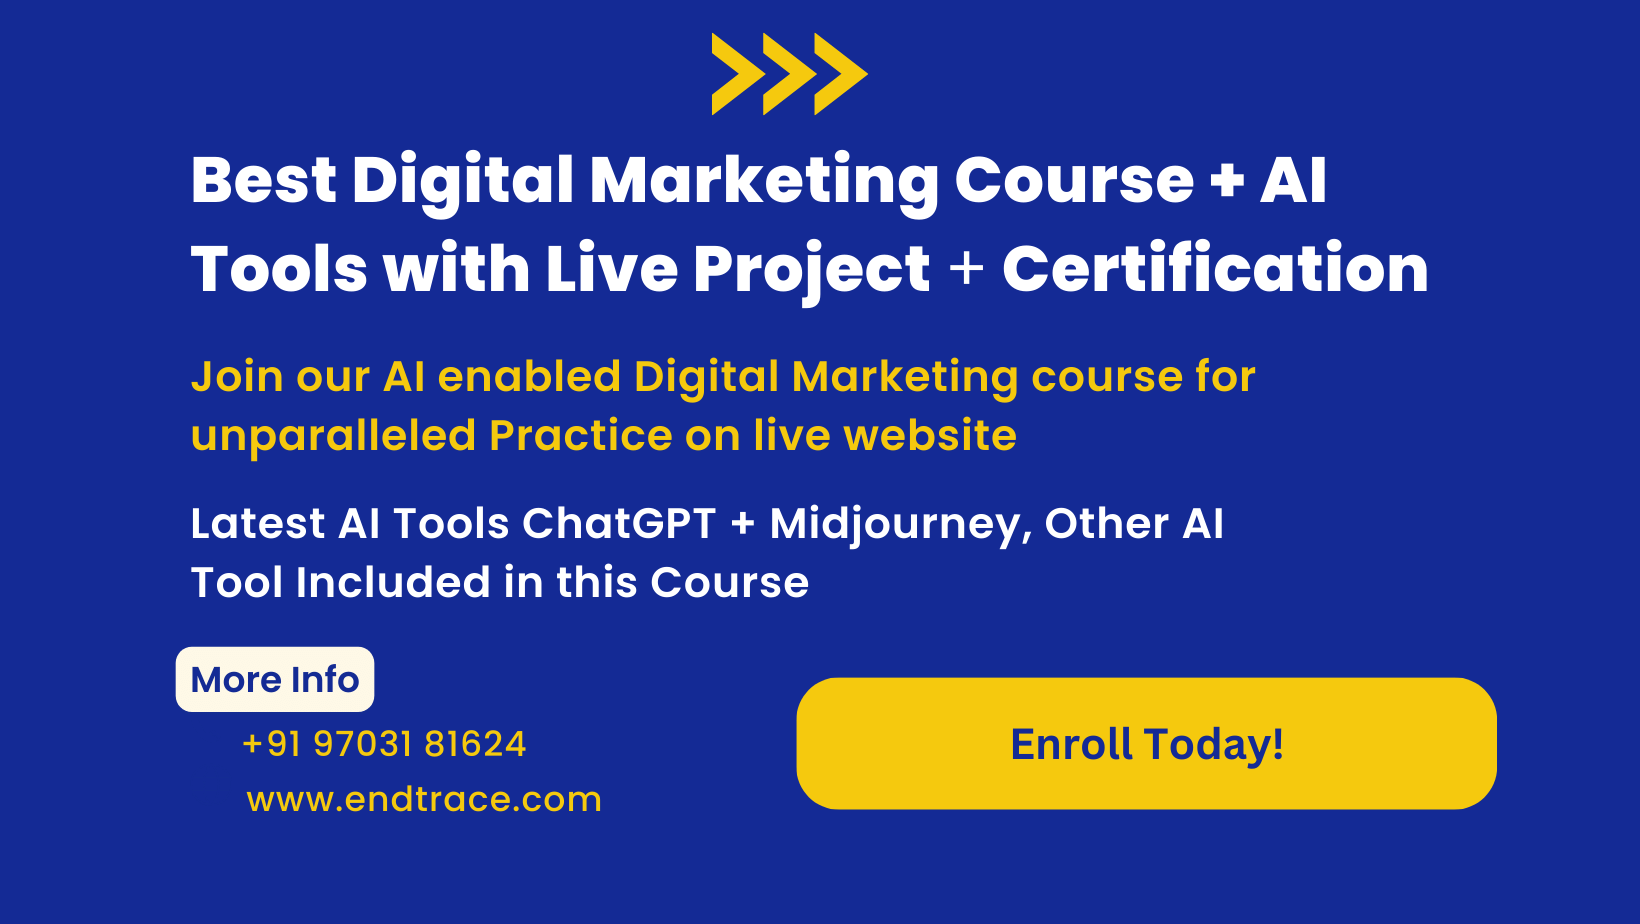 Learn digital marketing course with Live Project